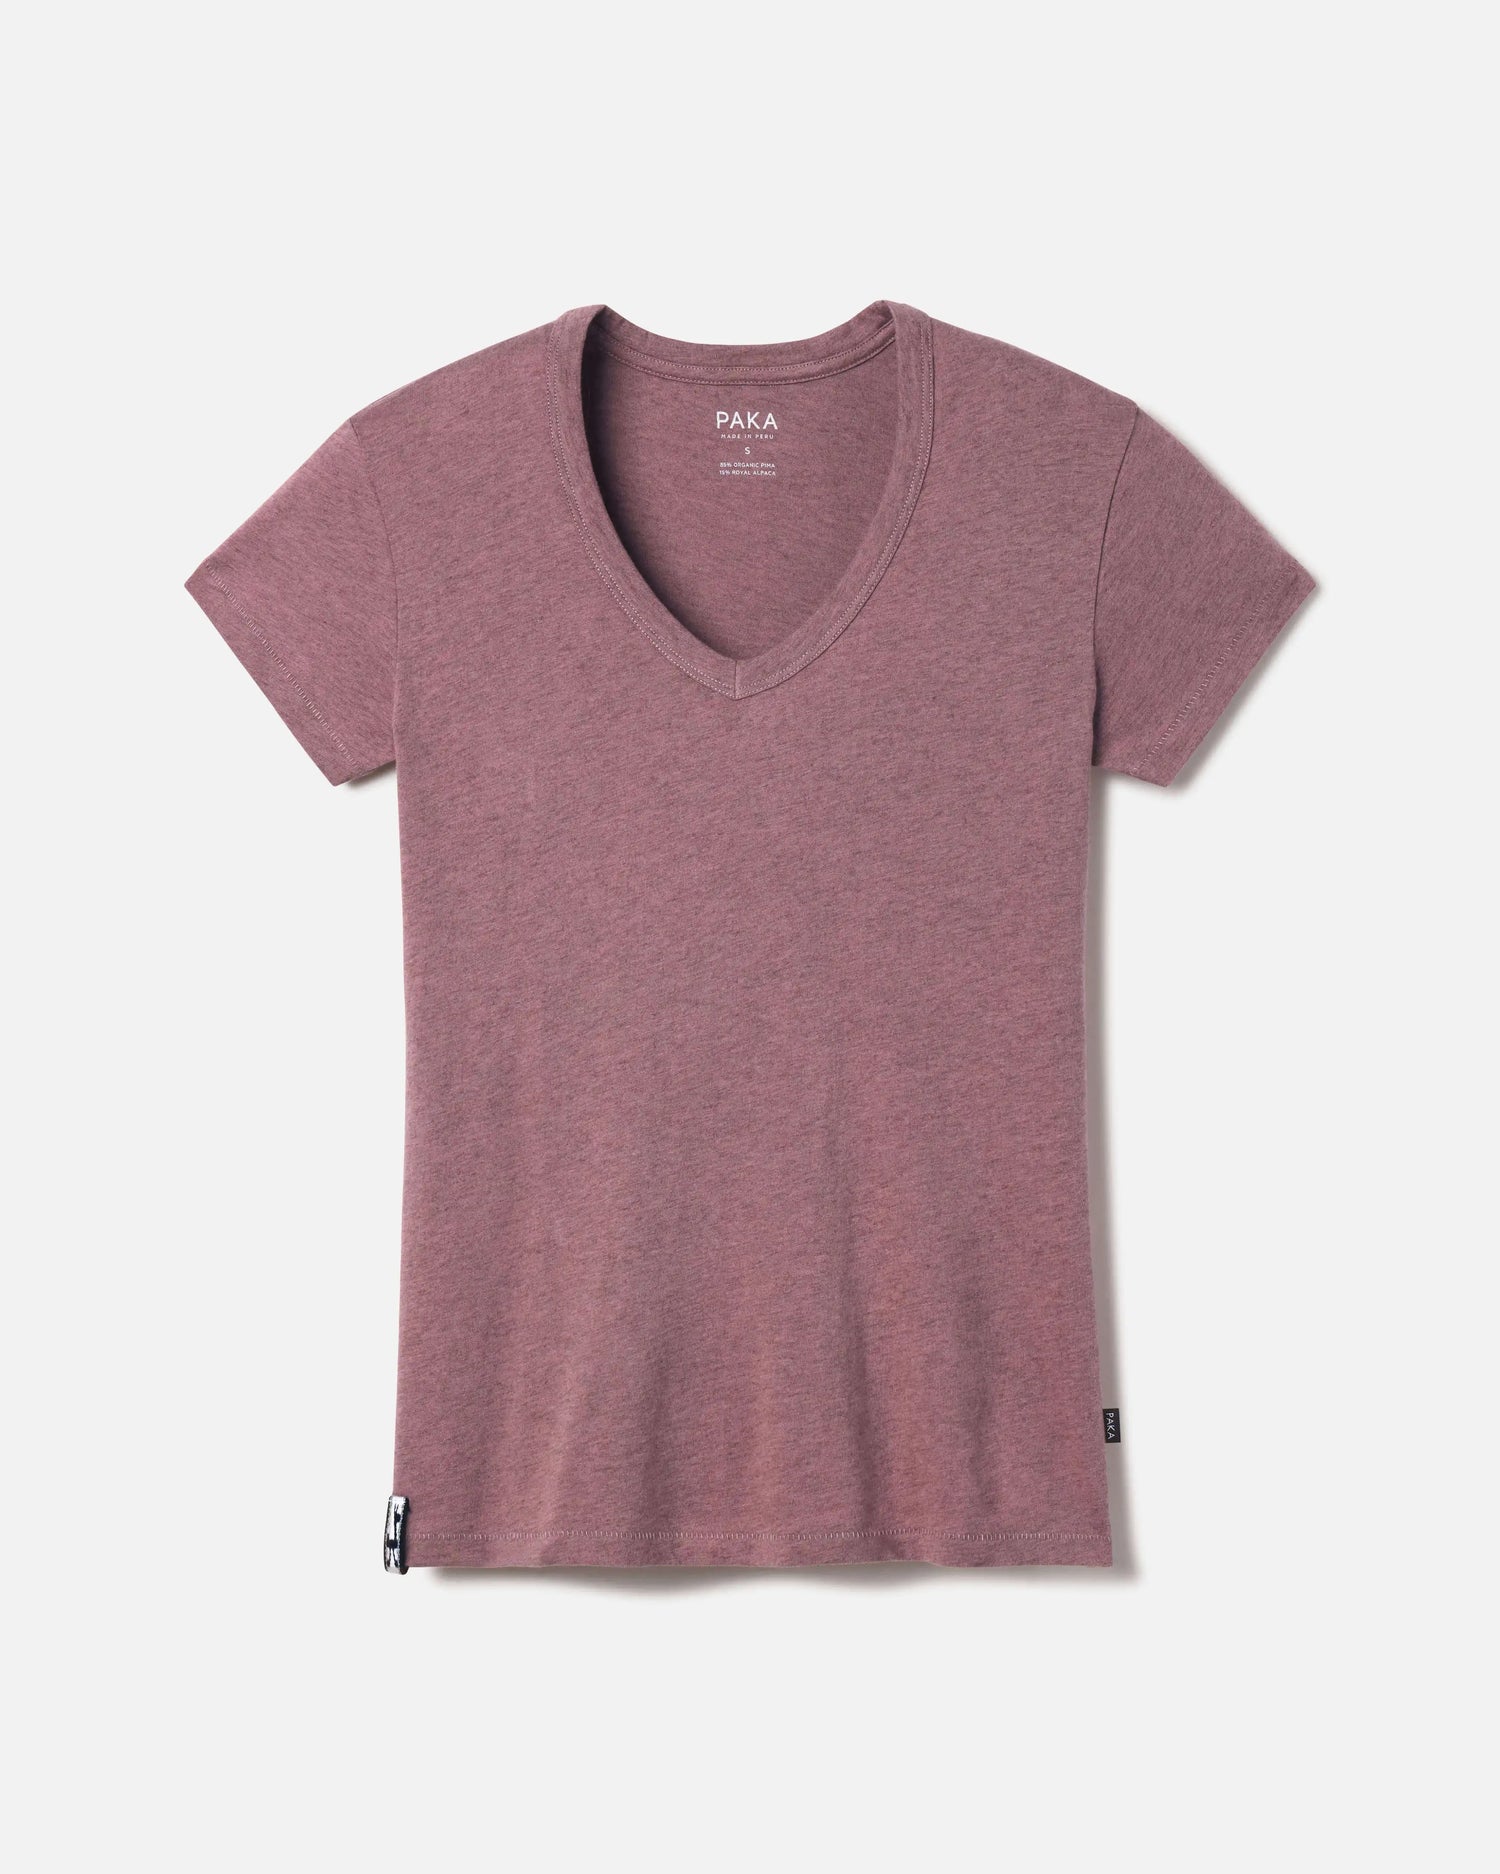 Woman's v neck tee in mauve flat lay 